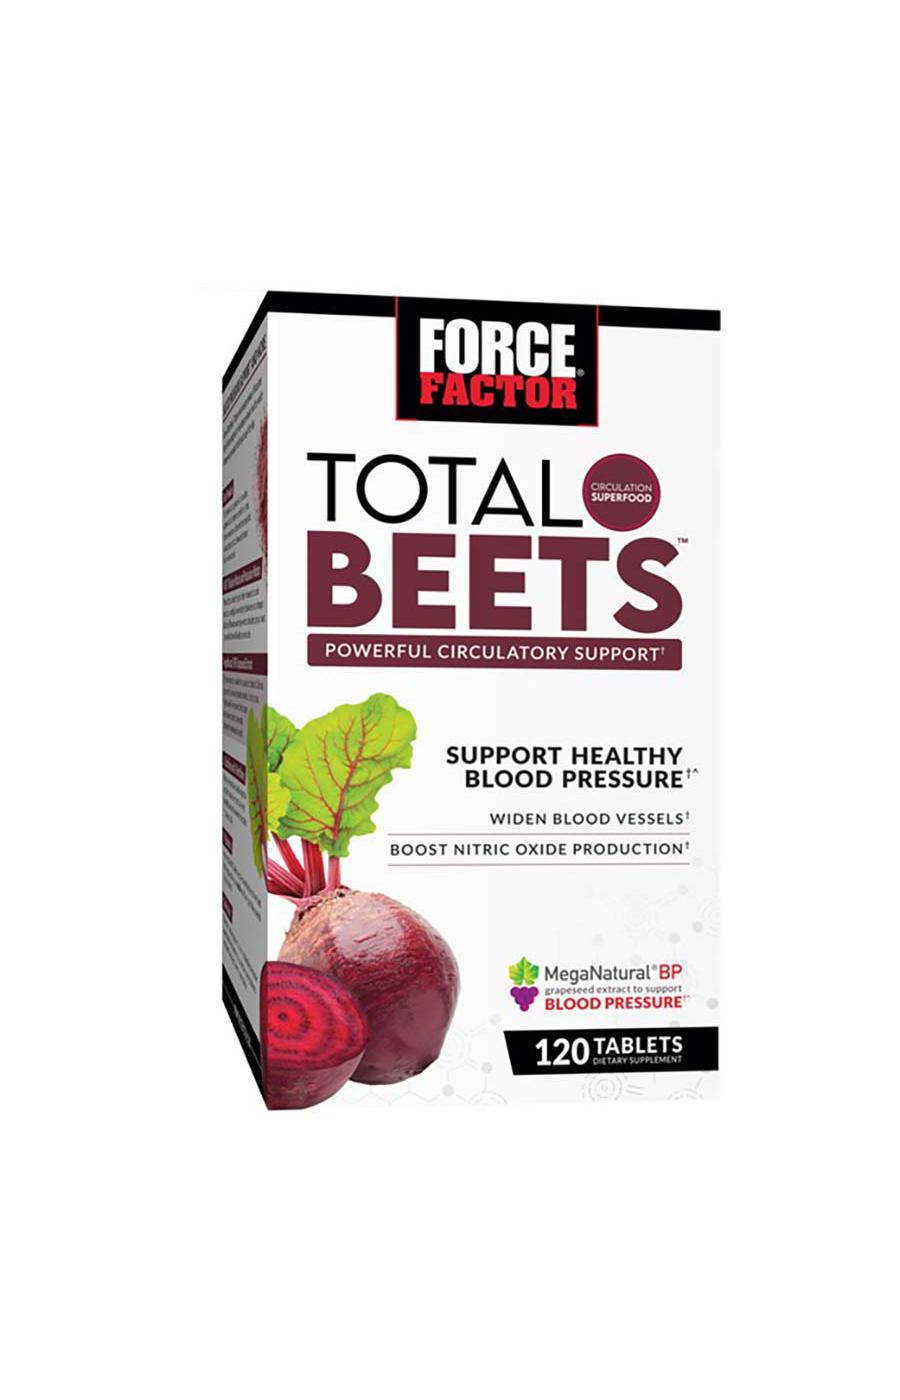 Force Factor Total Beets Tablets; image 3 of 4